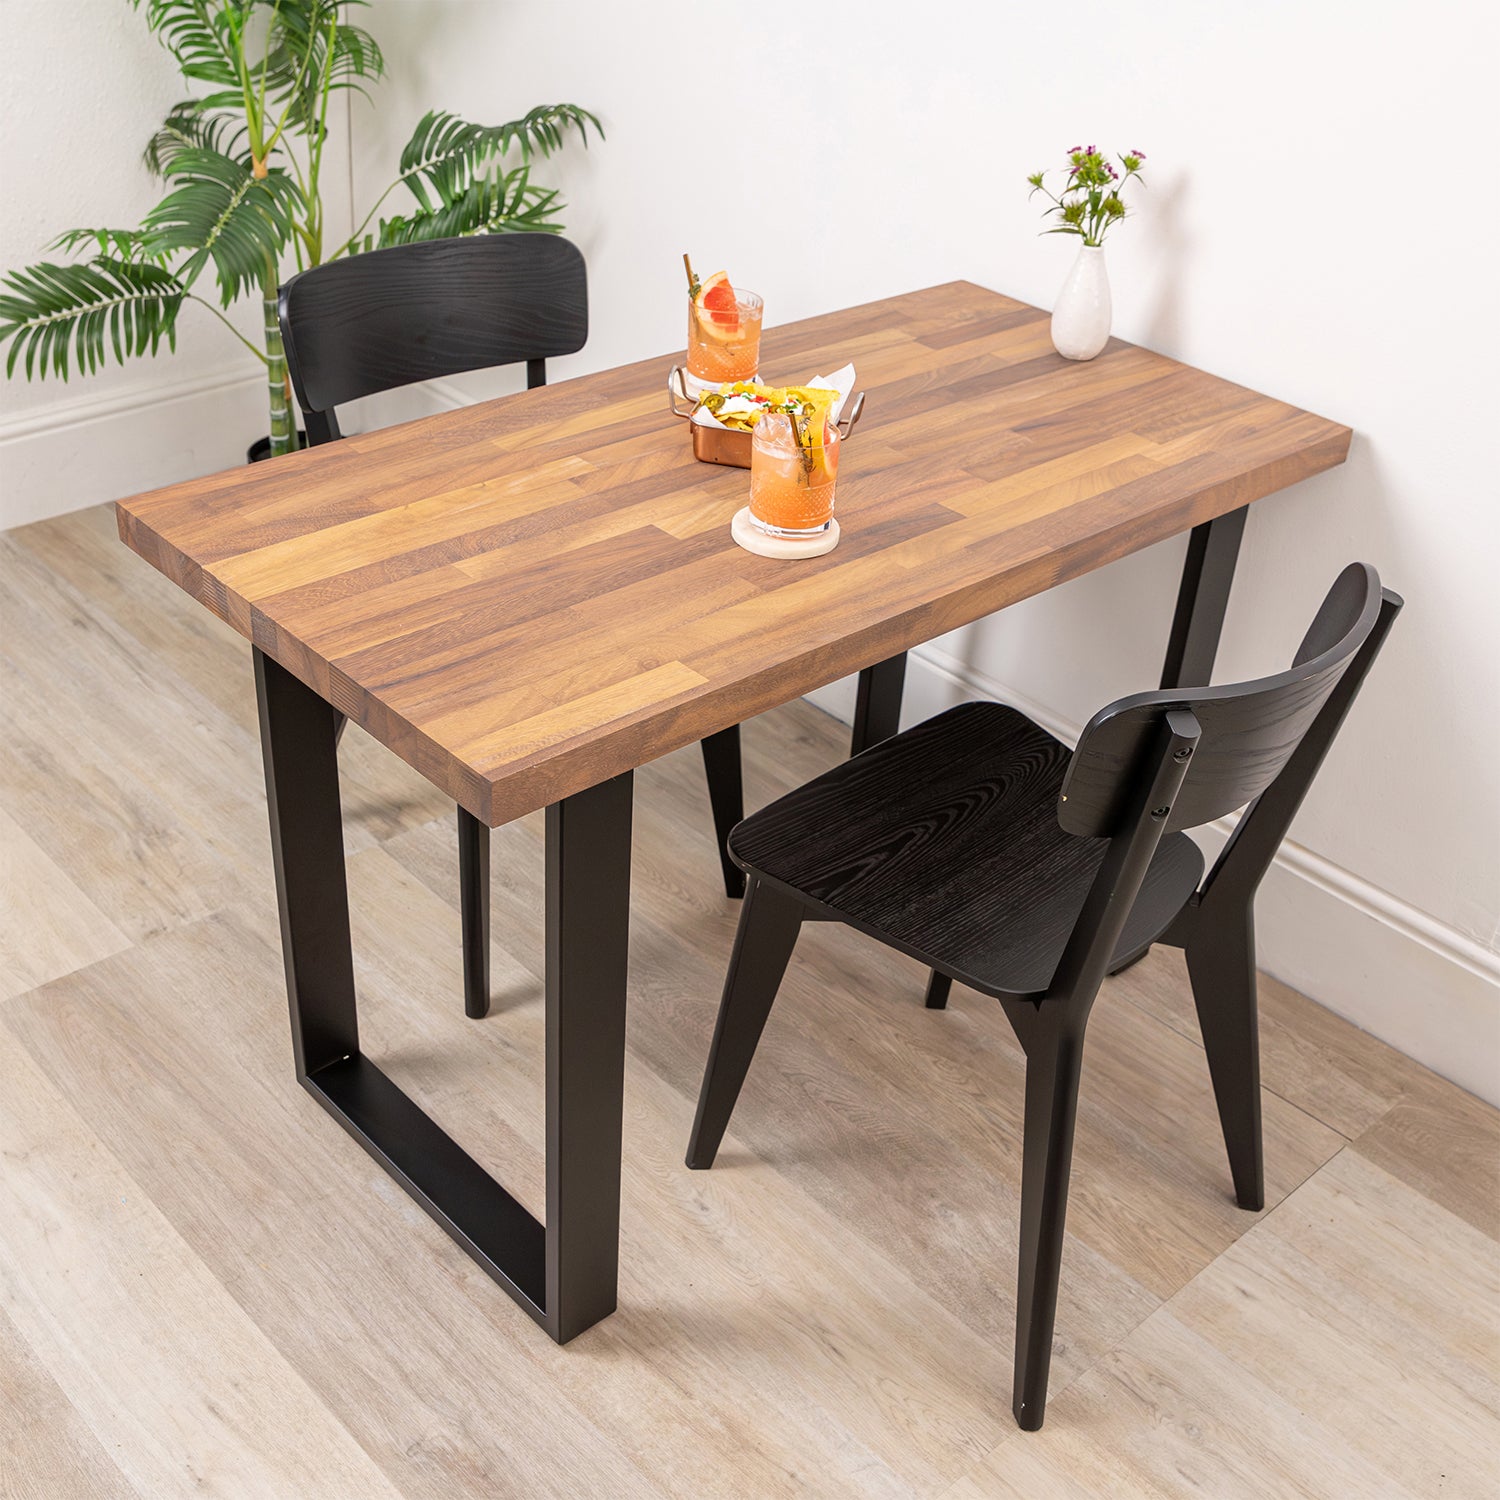 Iroko Solid Wood Table with Square Metal Legs (Sanded)